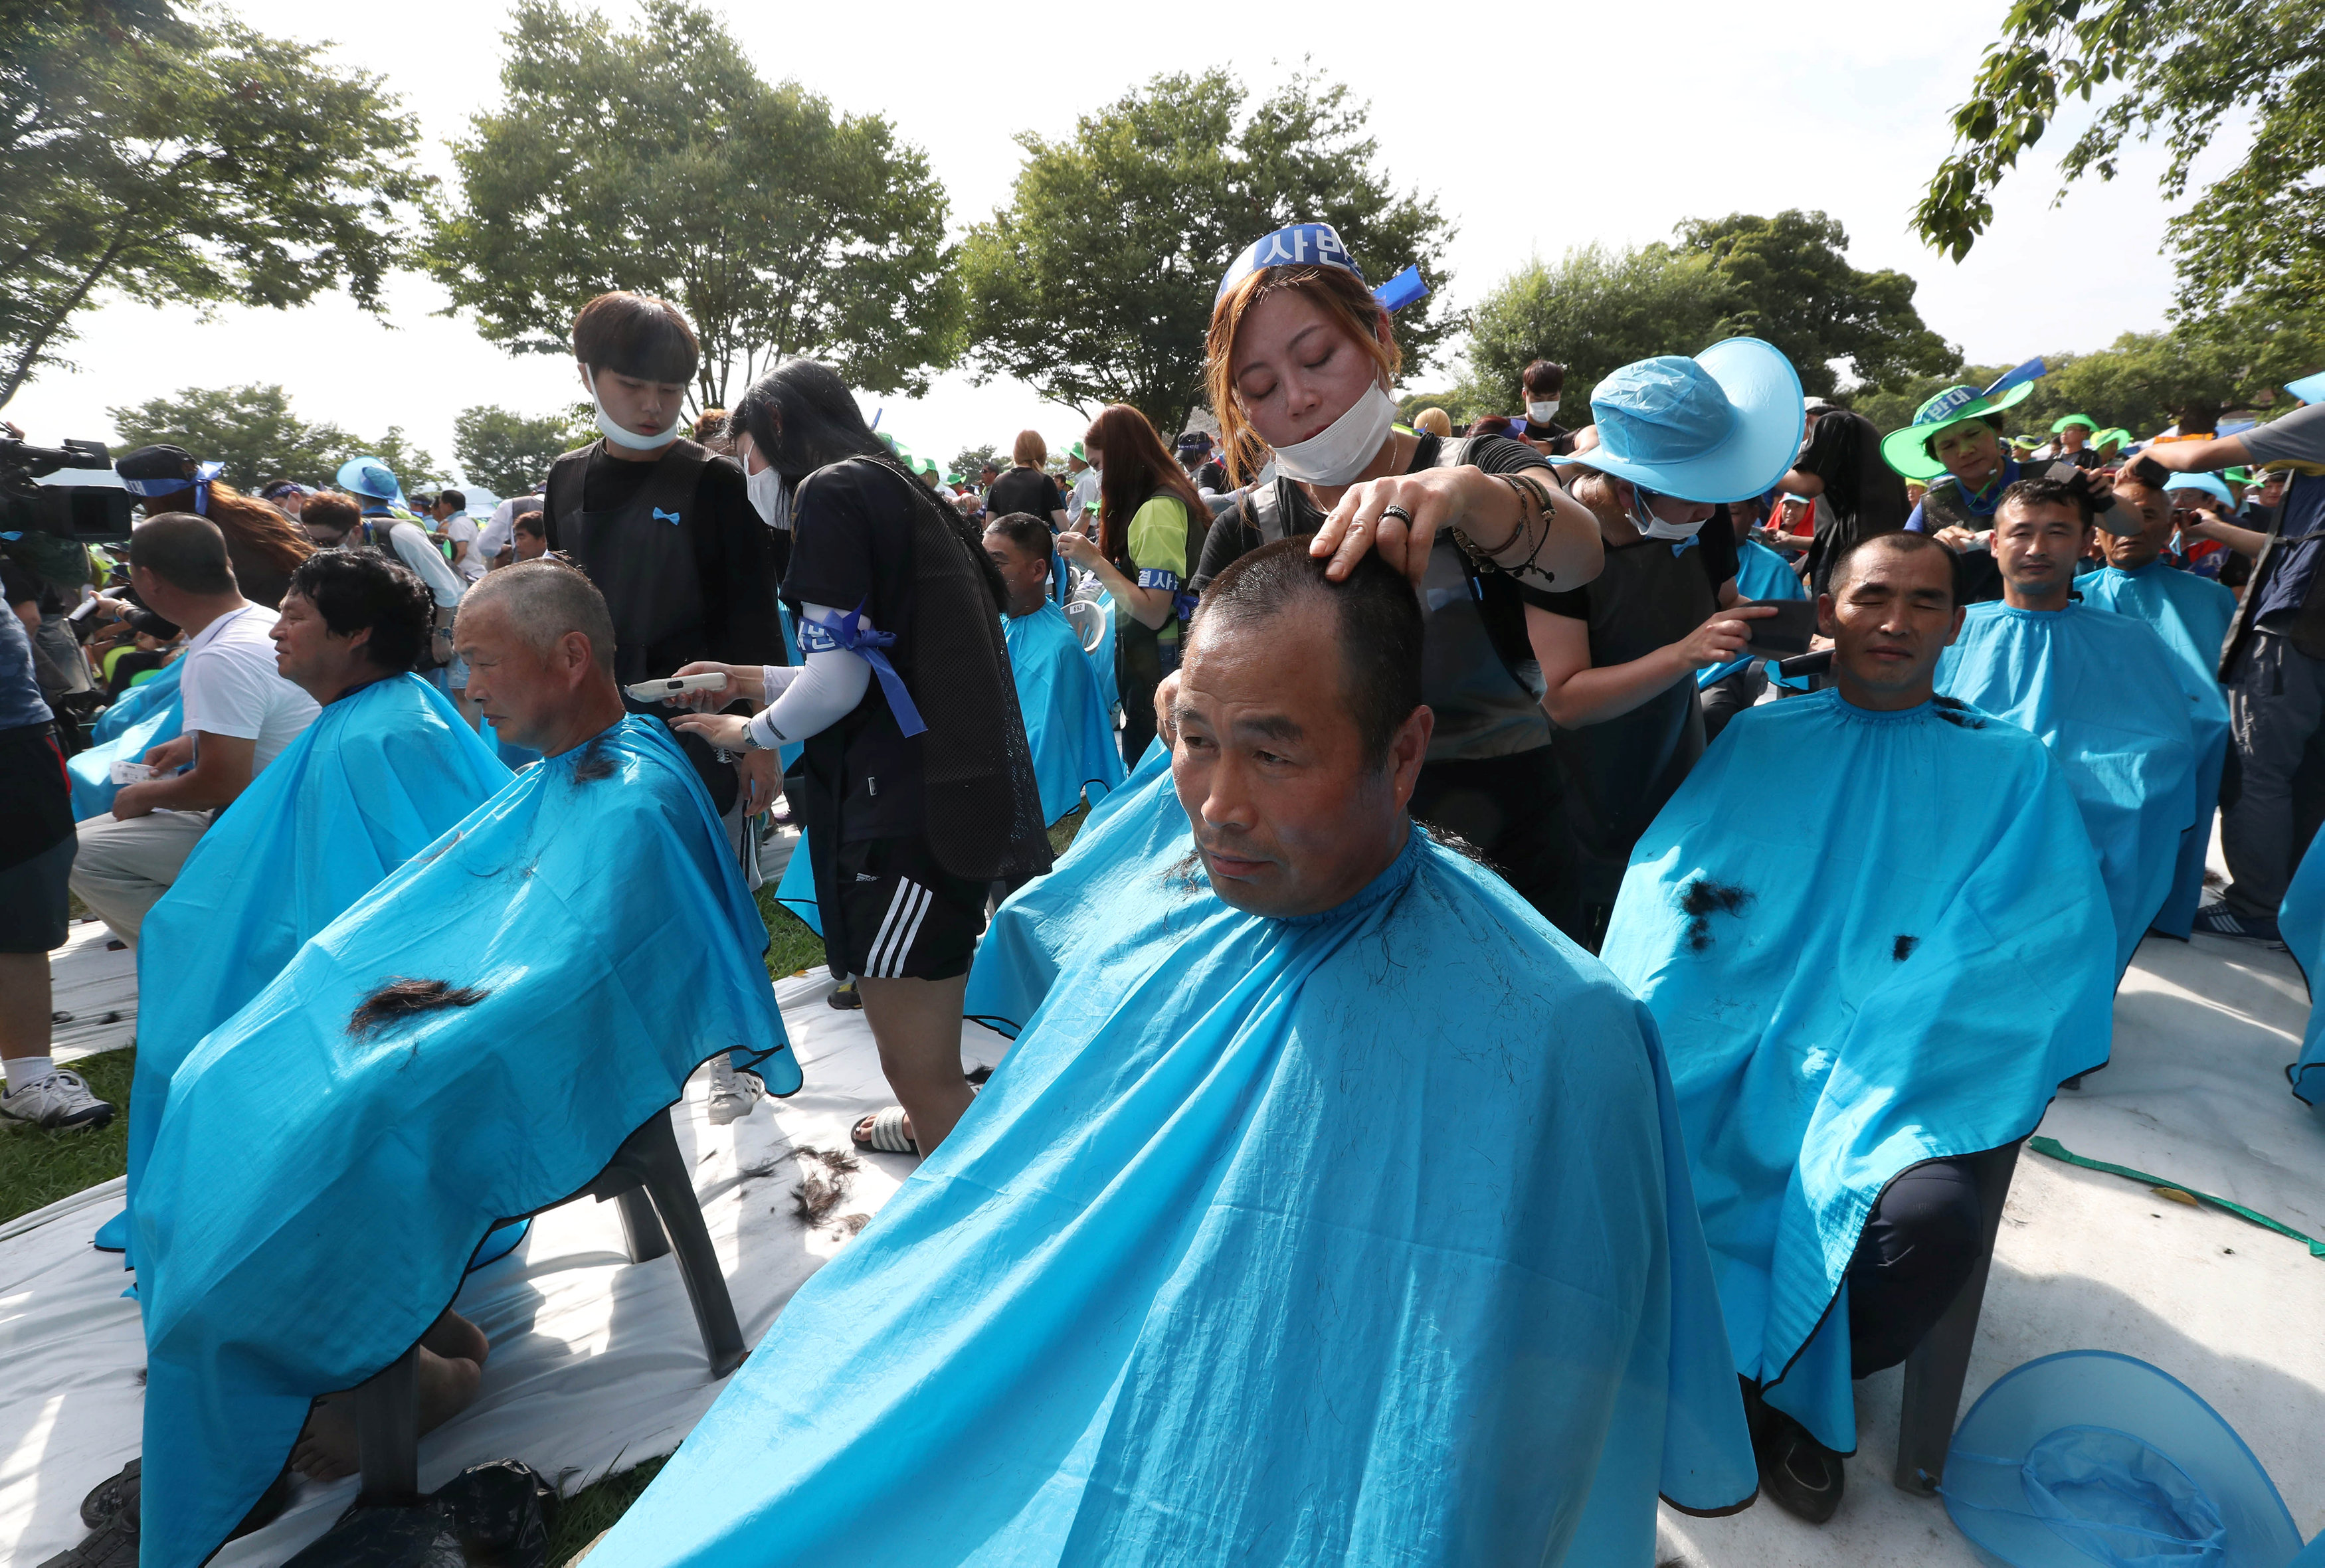 South Koreans Shave Heads To Protest Us Thaad Missile Defense System The Japan Times 